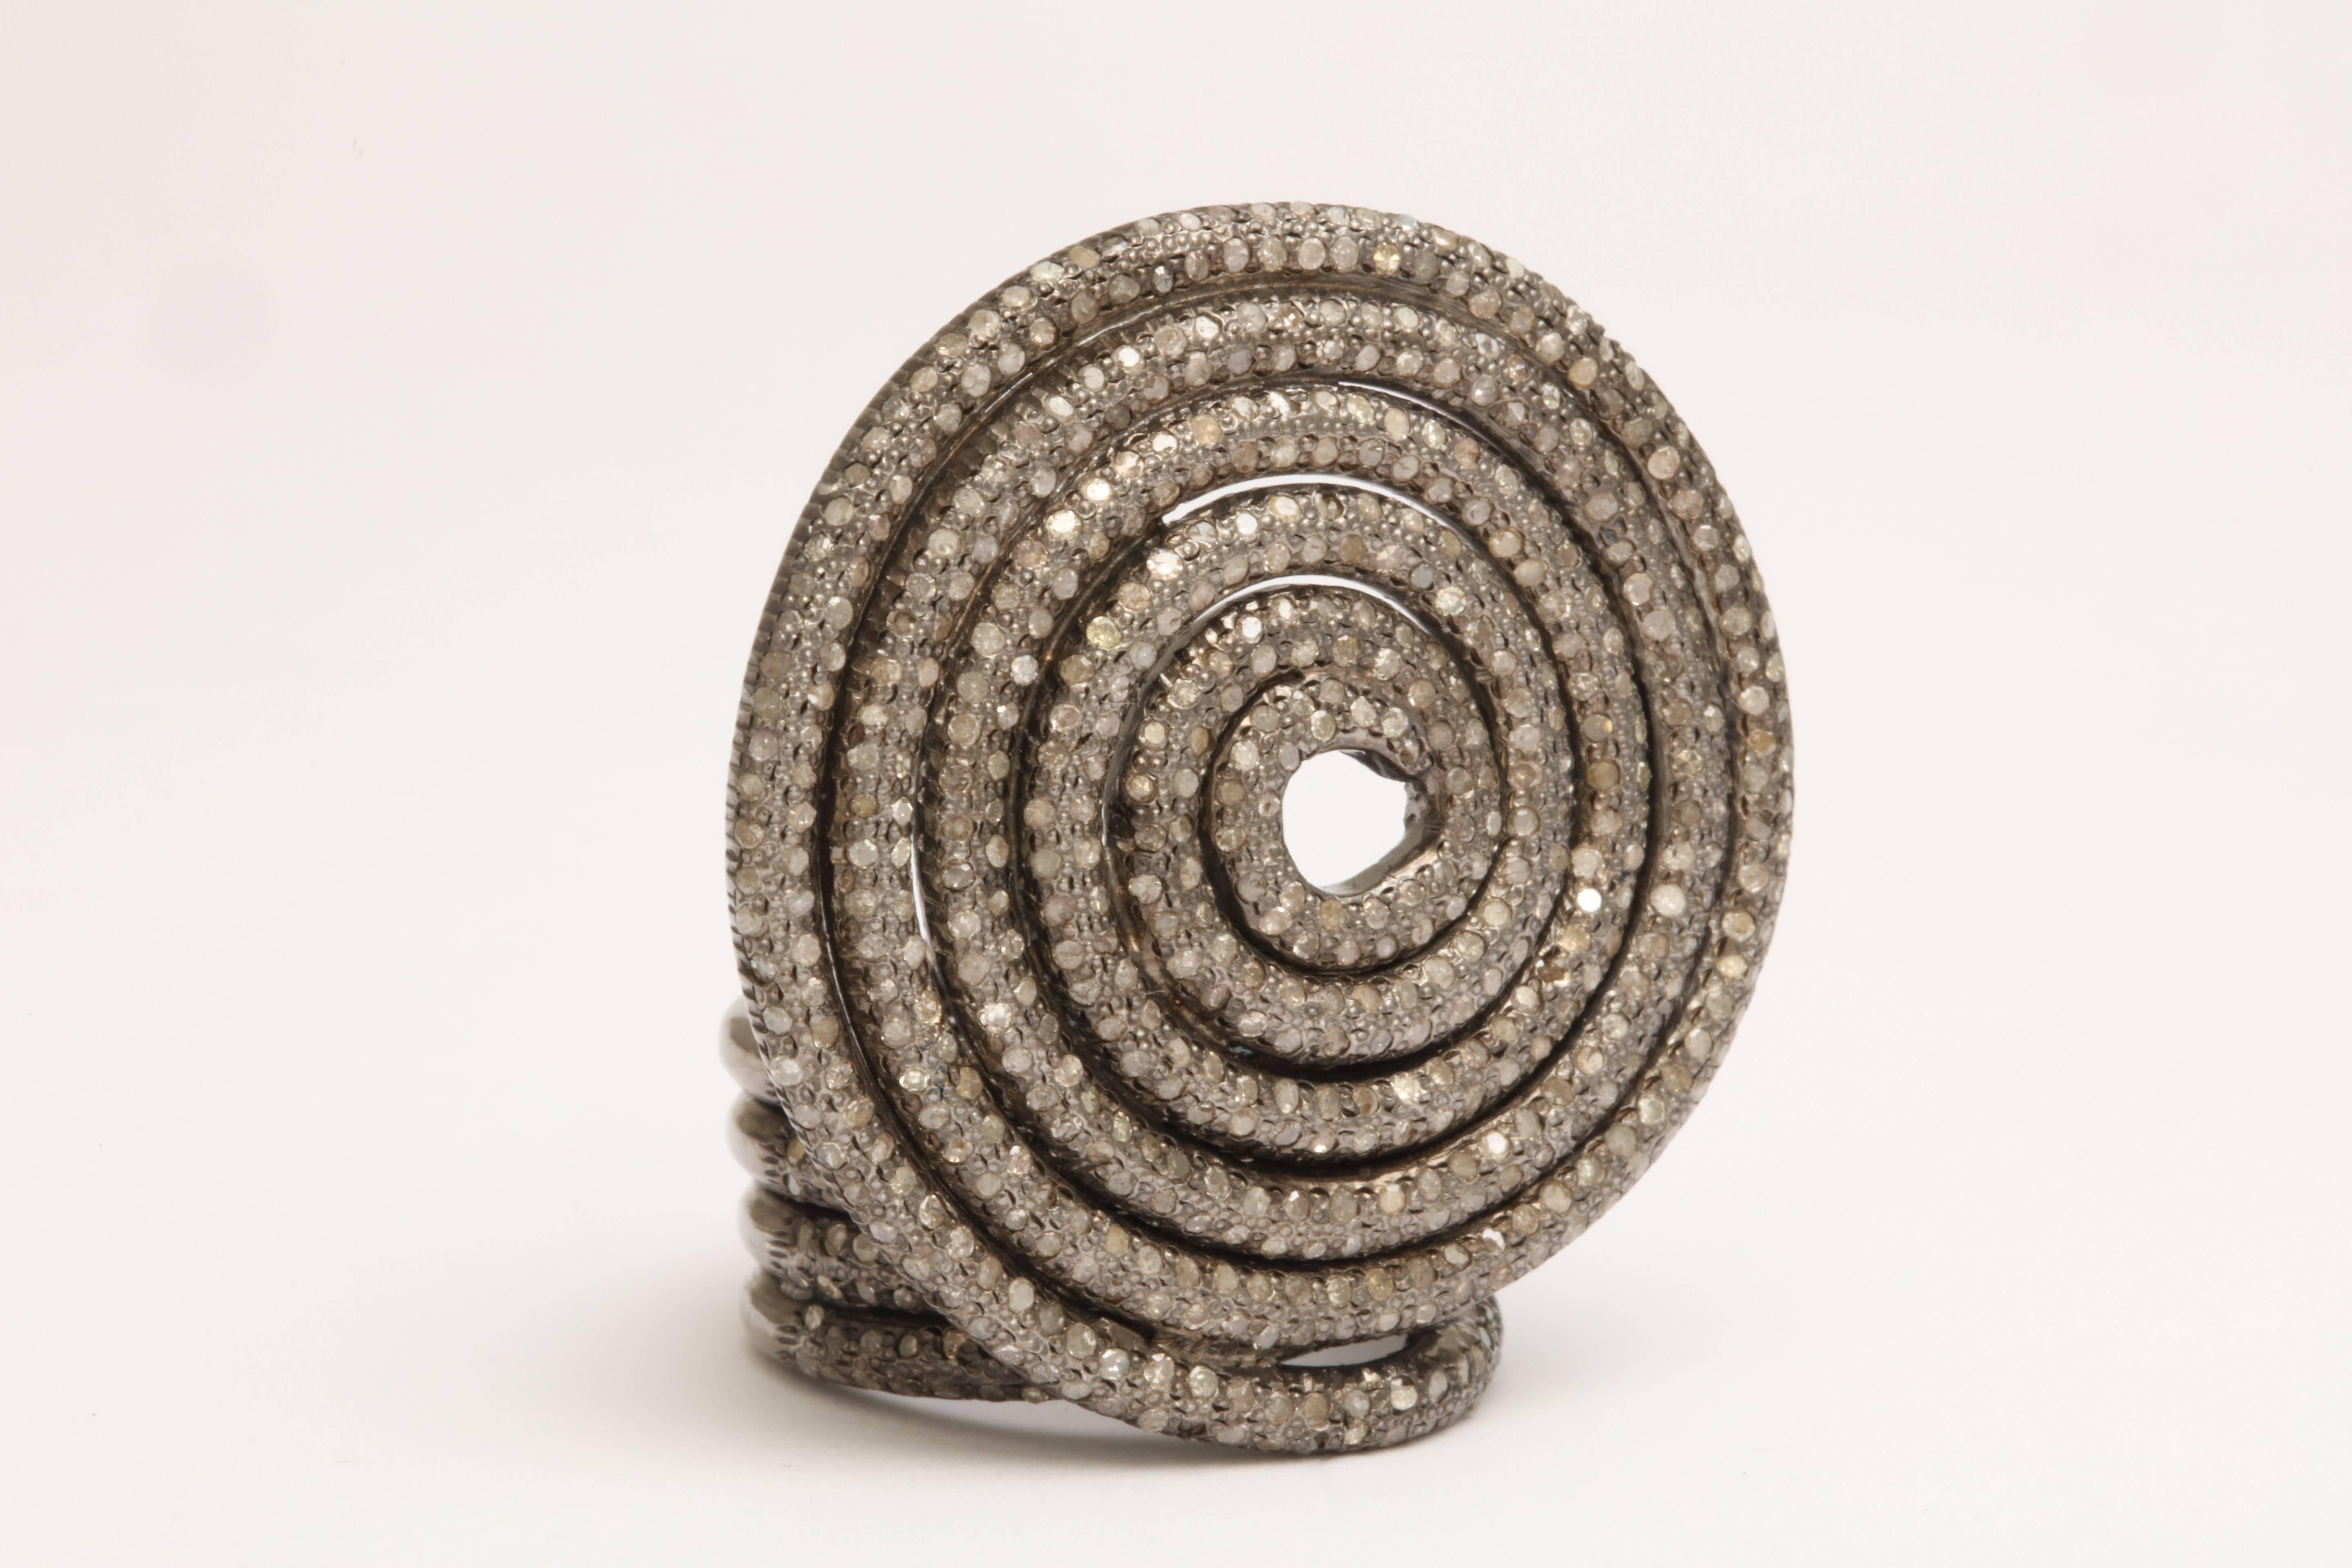 A rhodium plated sterling silver and diamond coiled licorice ring. There are approximately 3.45cts of diamonds.
Size 7
Width: 1.50 inches